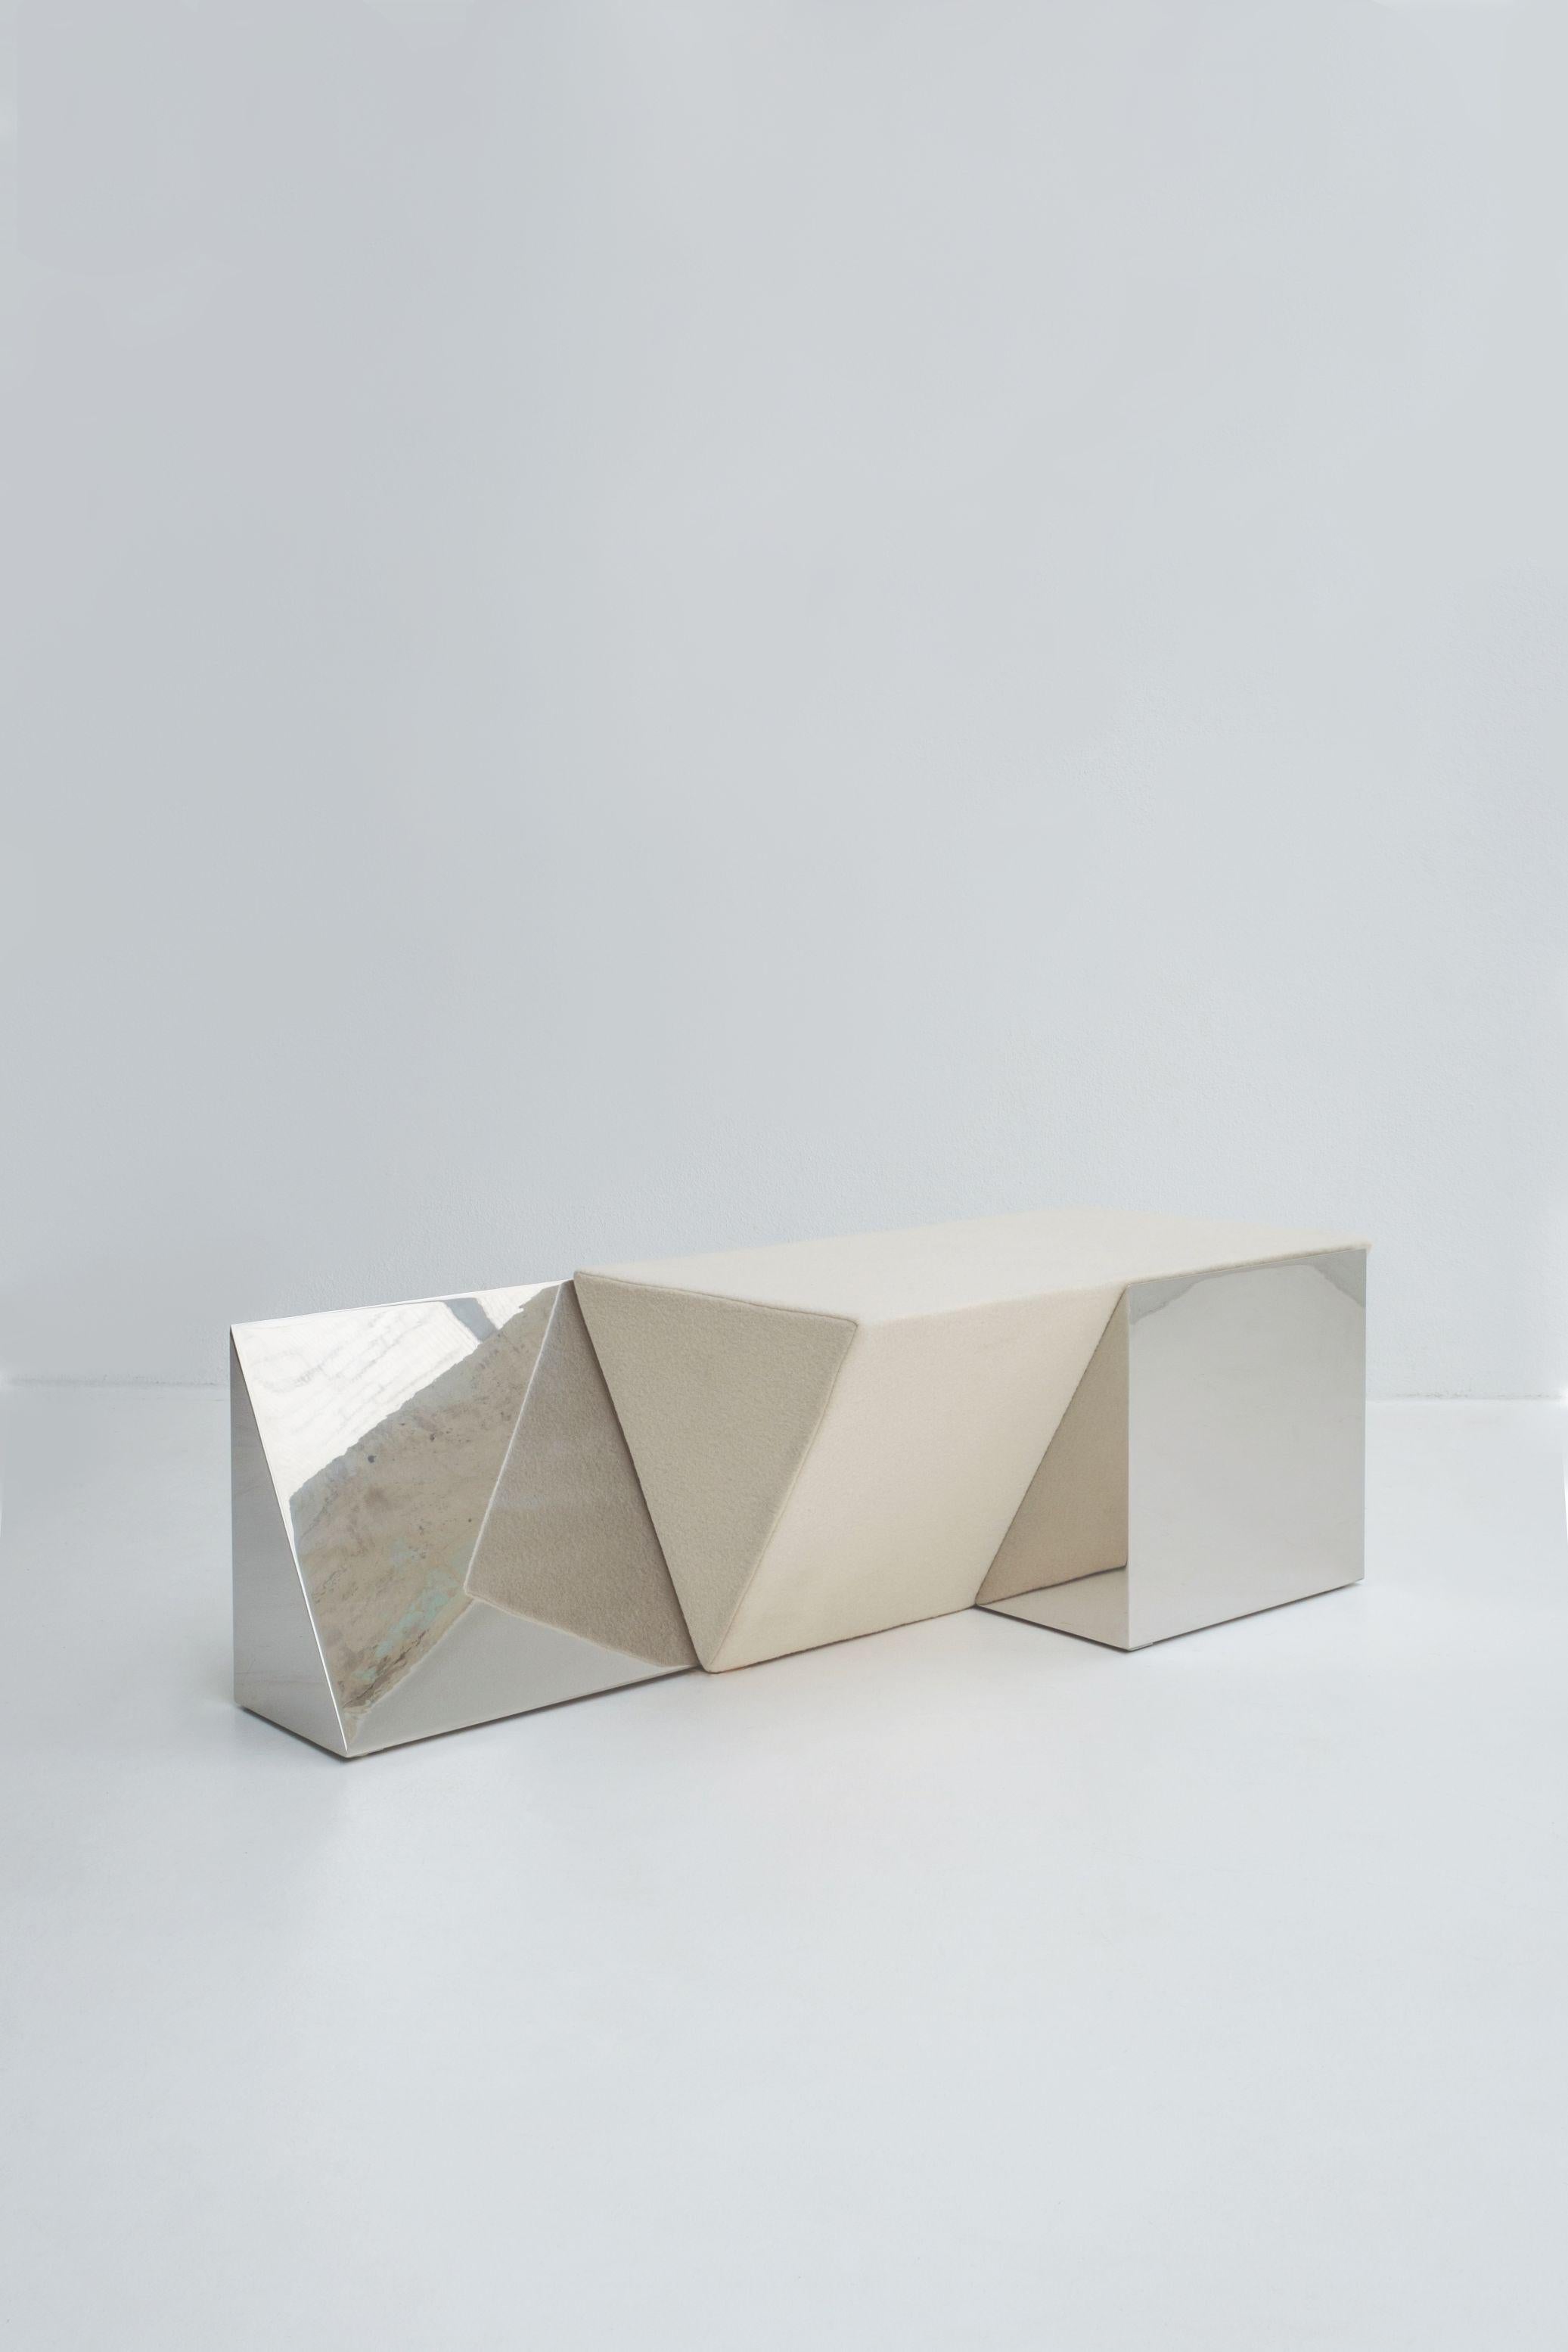 Miljevina bench by Nortstudio
Dimensions: 40 x 120 x 46 cm
Materials: Mirror polished steel, mirror-look HPL.


Three abandoned buildings with a strong geometrical character were the inspiration behind a new collection of sculptural objects.

After